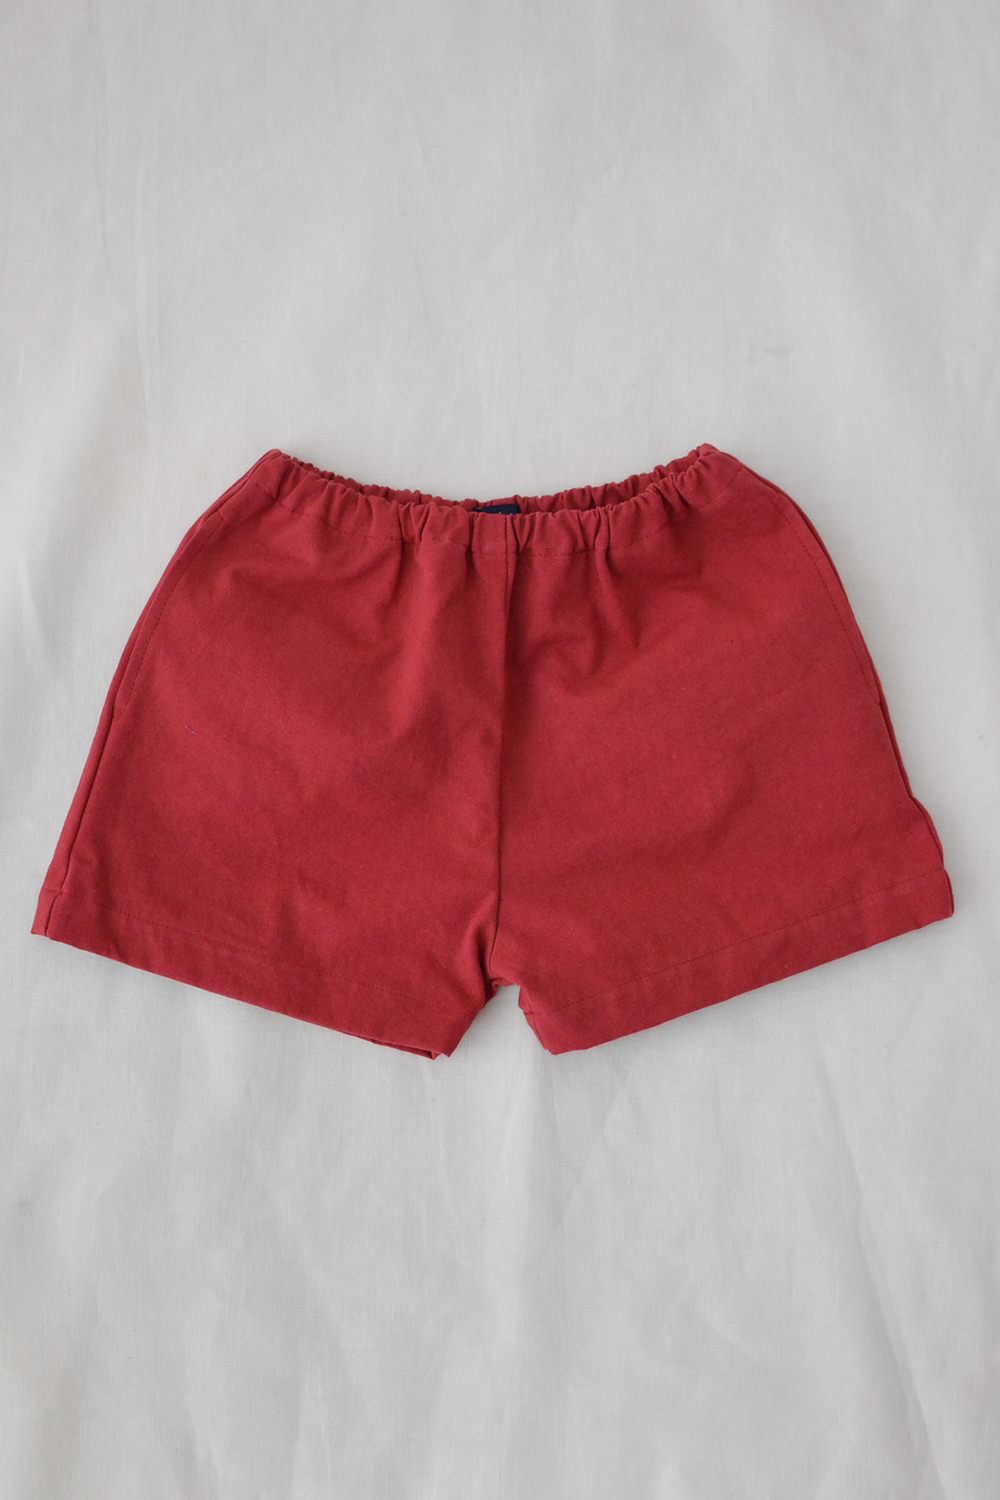 Kid's Summer Shorts - Red Top Picture